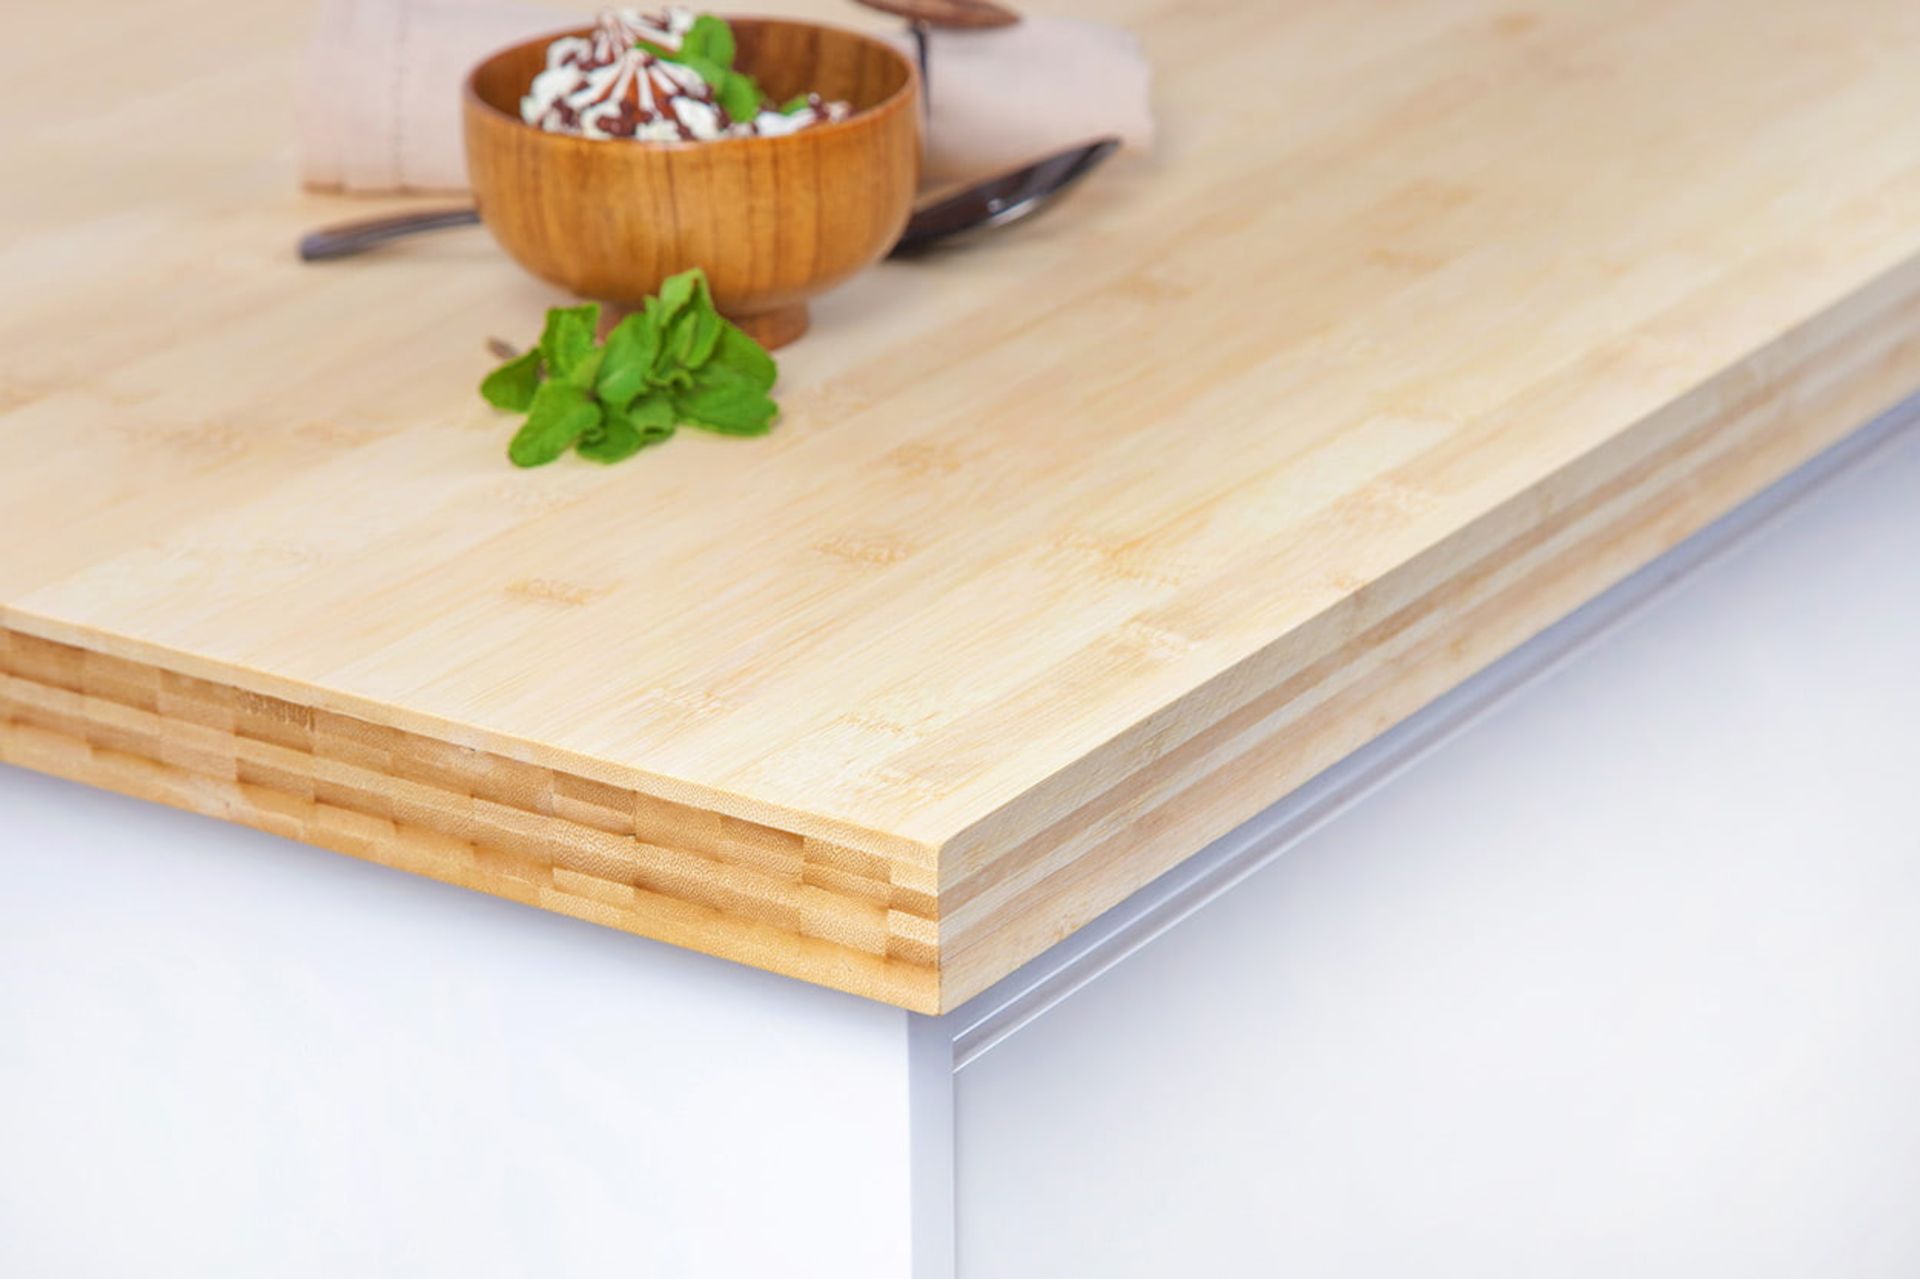 5 x Layered Solid Bamboo Wood Kitchen Worktops - Sizes Include: 3000x650, 4000x650 and 300x900mm -